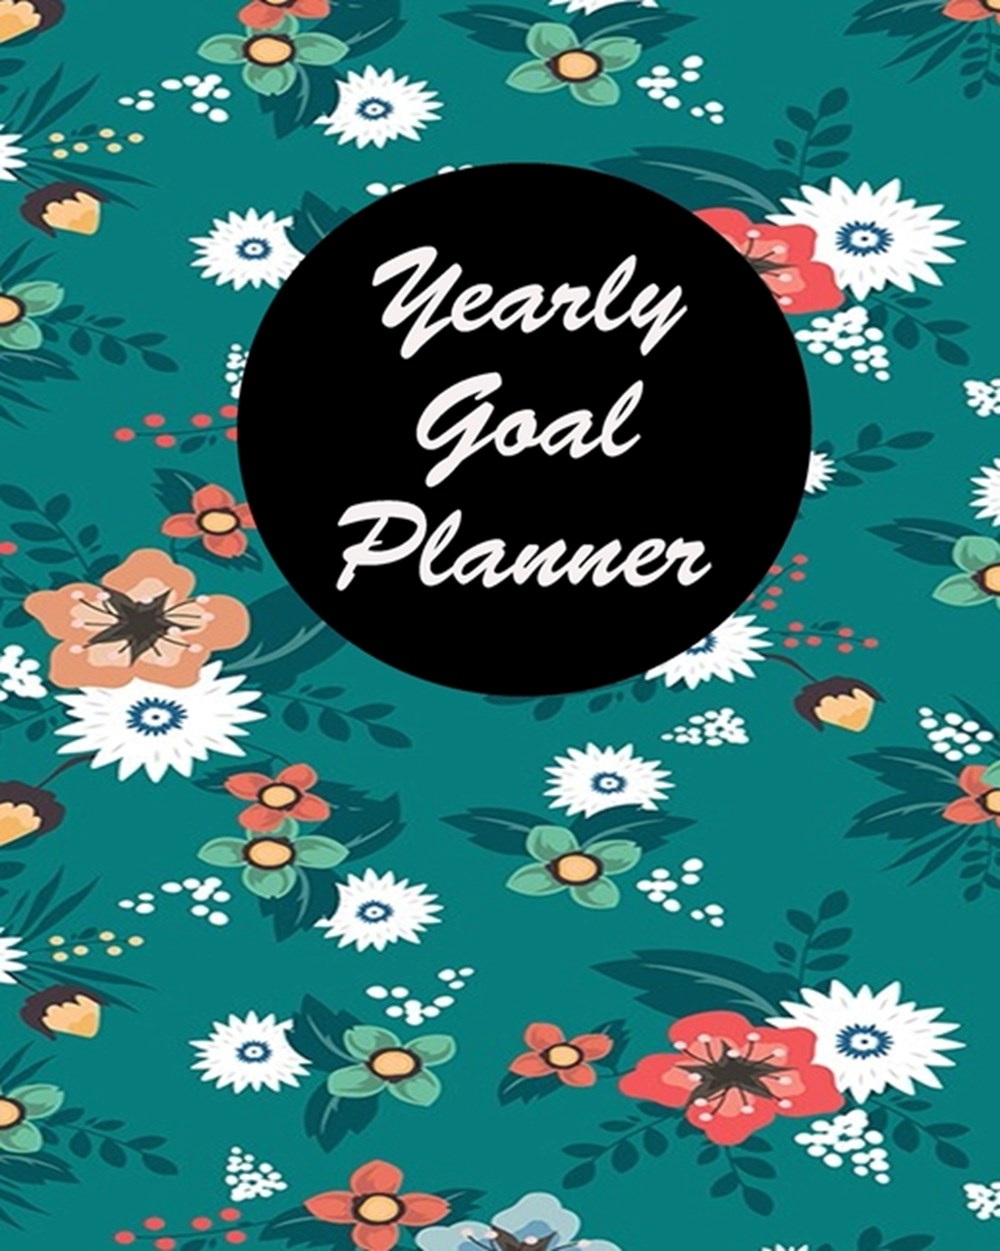 Yearly Goal Planner Yearly Goal Planner Undated 12 Months Goal Planner - 8 x 10 -120 Pages - Boss CE